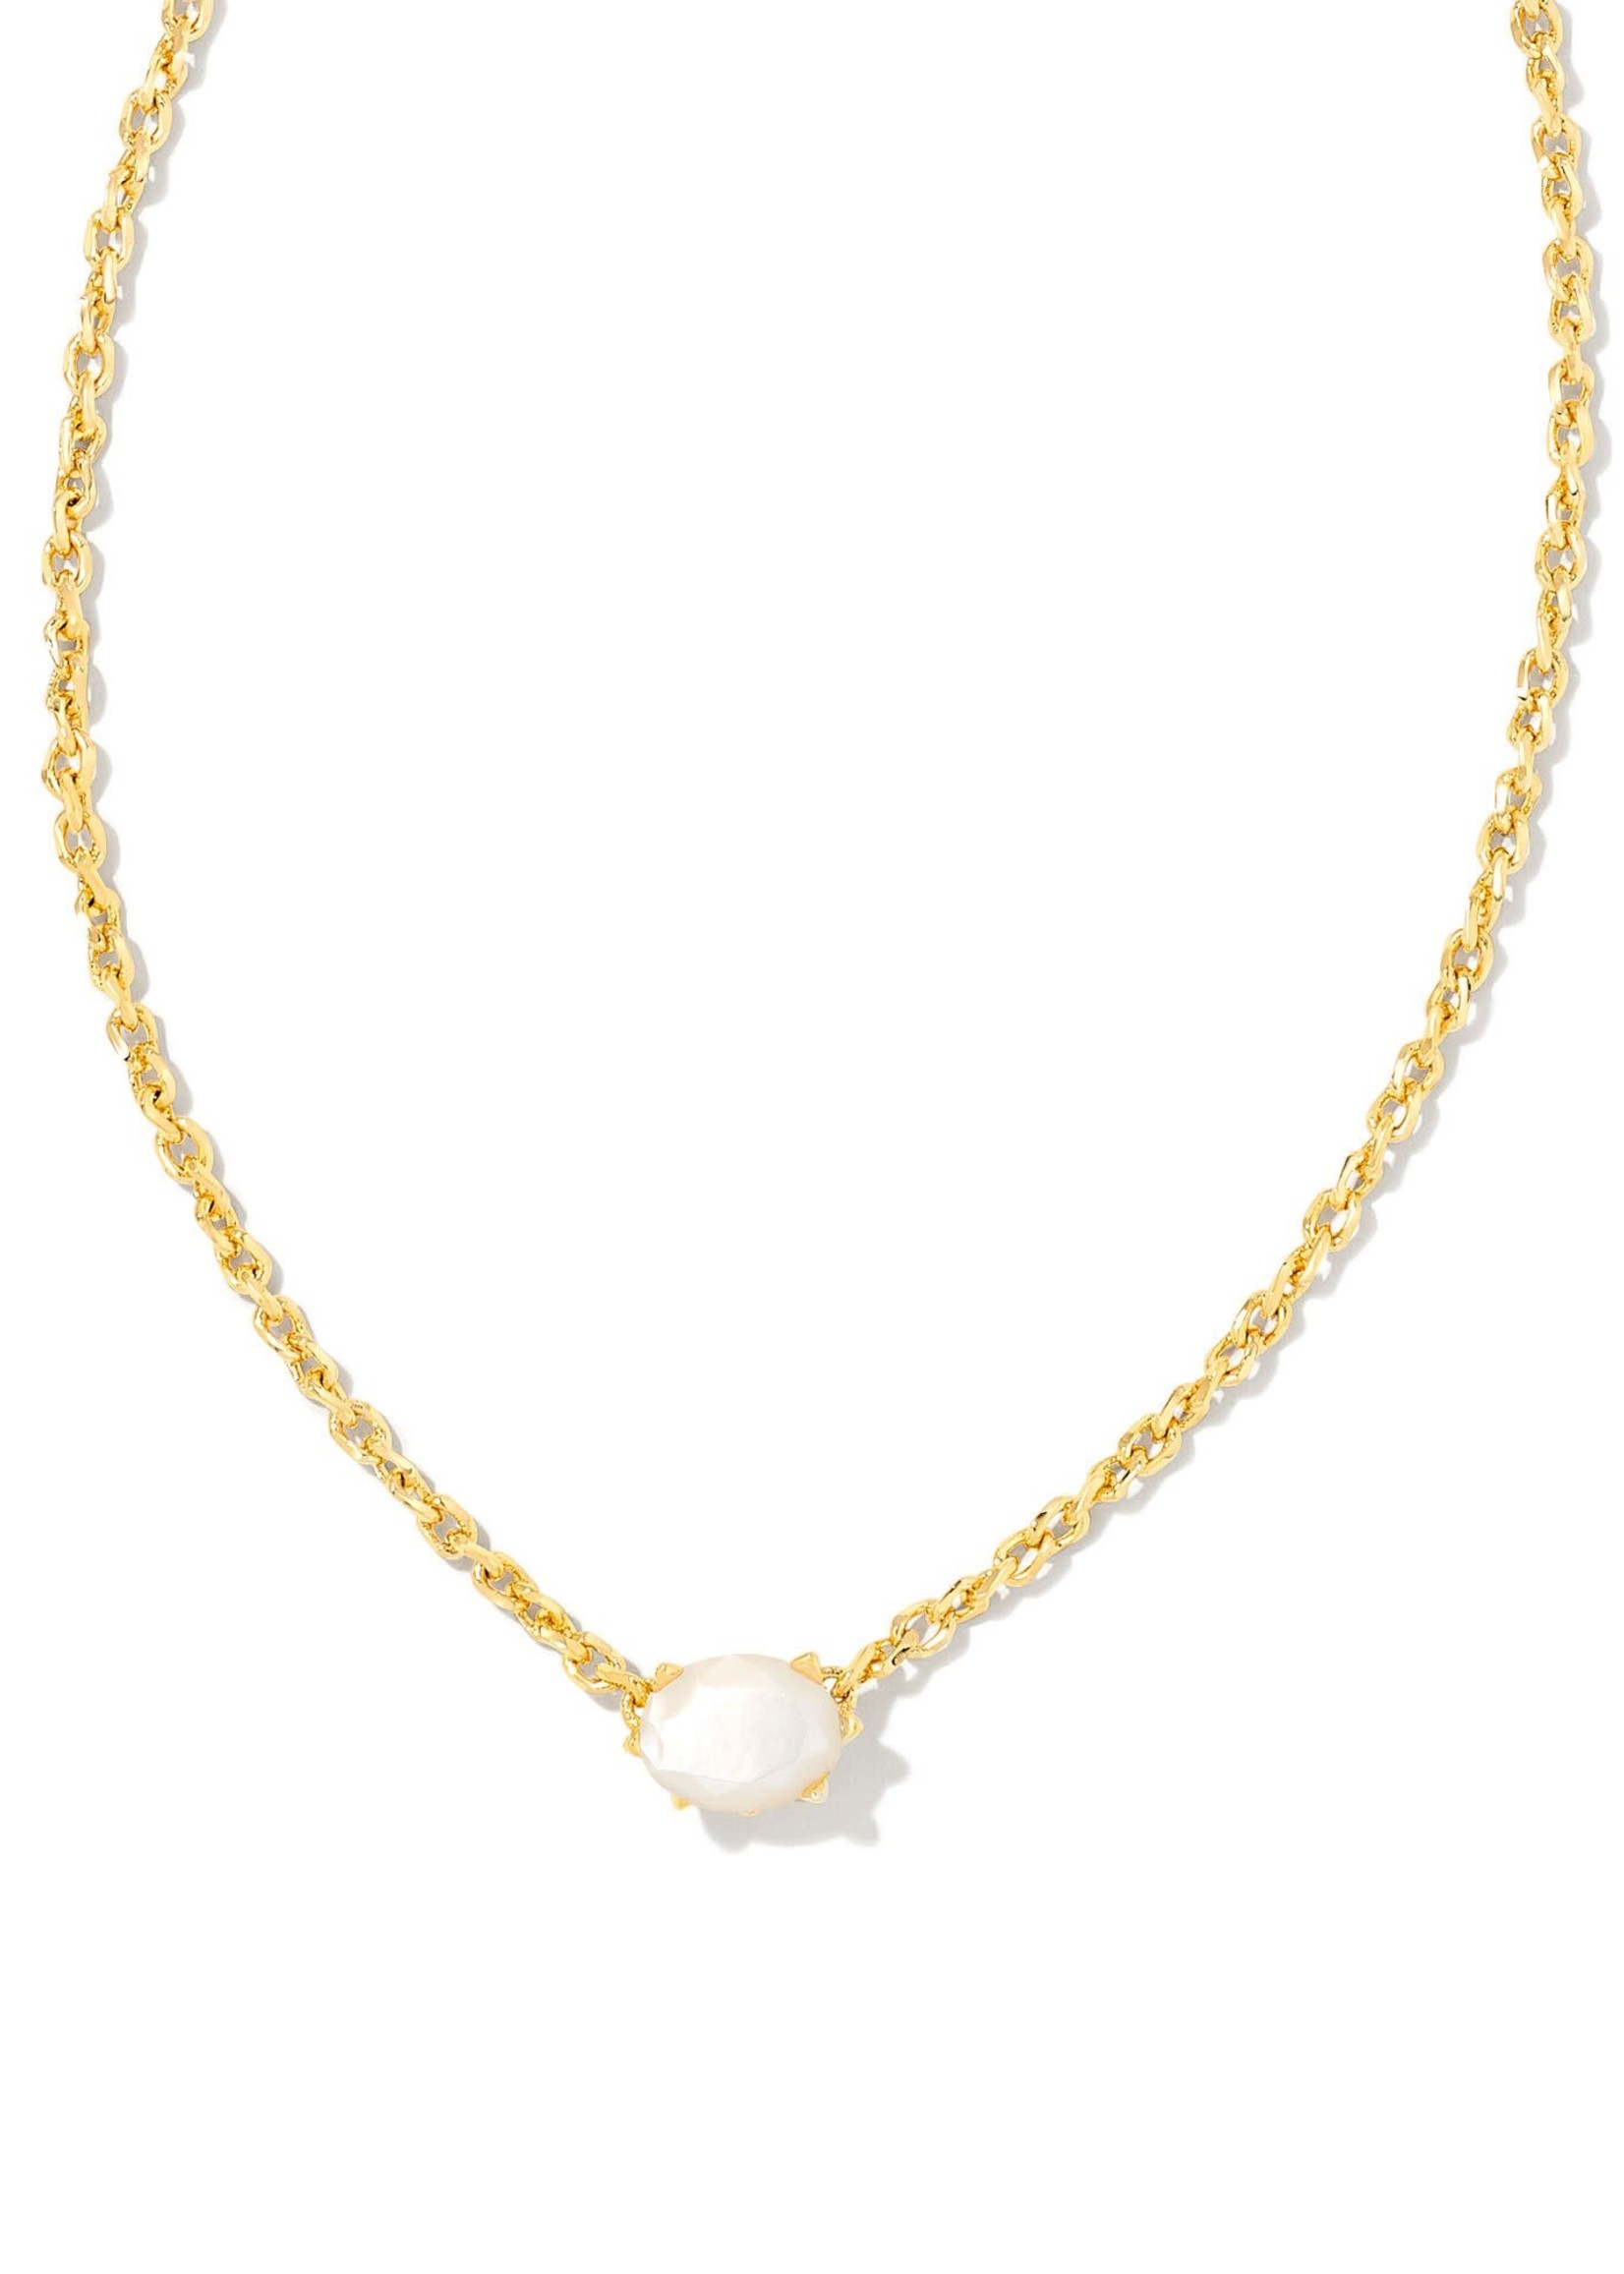 Kendra Scott CAILIN CRYSTAL PENDANT NECKLACE GOLD IVORY MOTHER OF PE